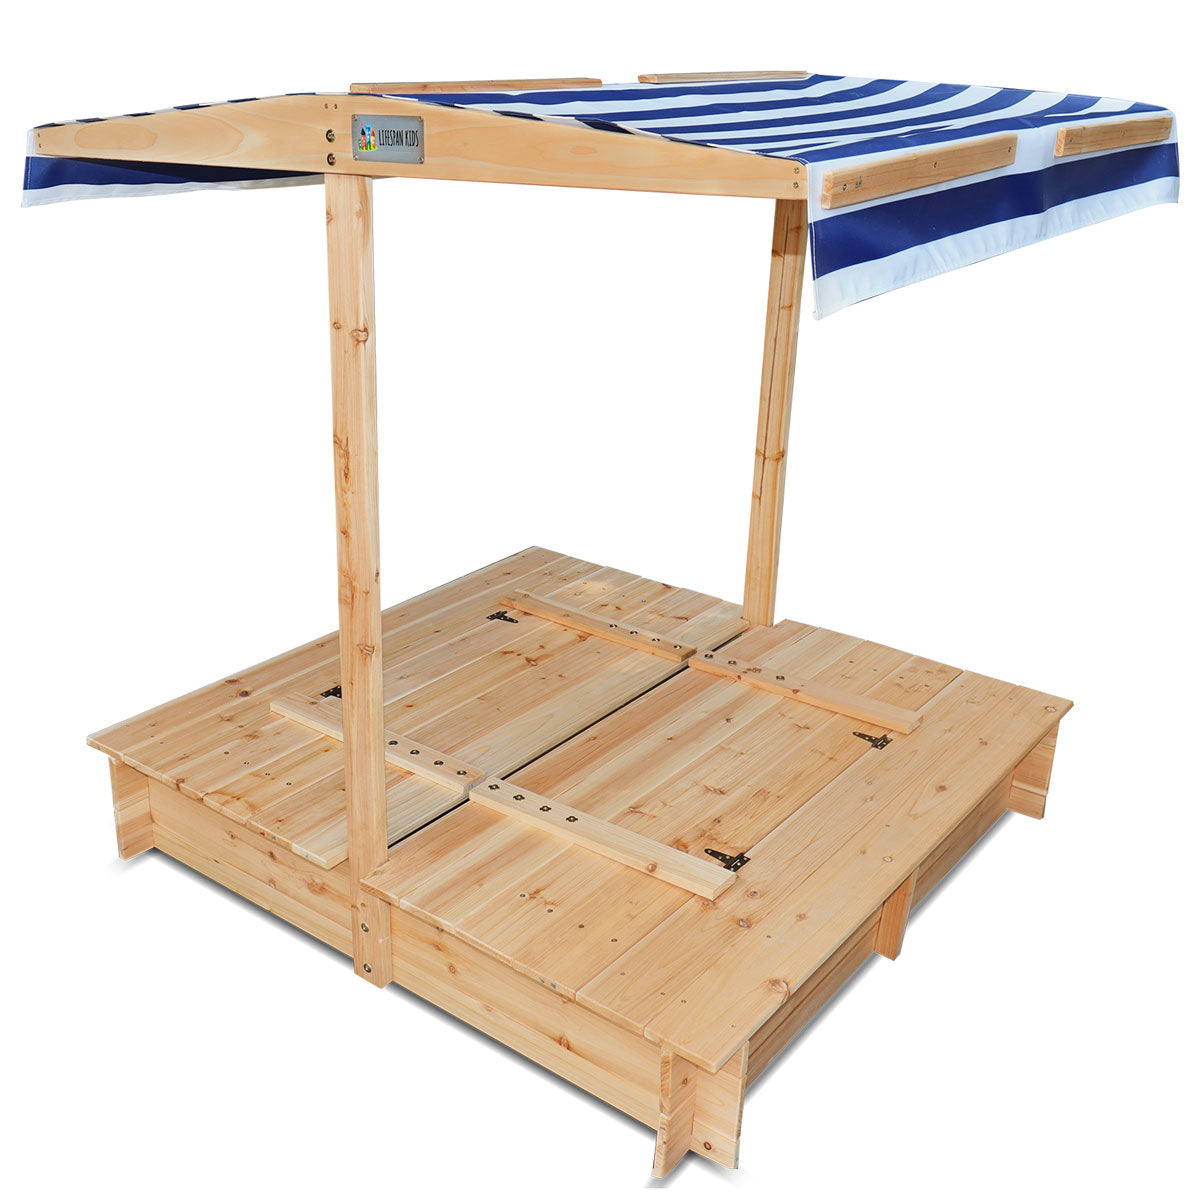 Lifespan Kids Skipper Kids Sandpit with Shade Canopy, Seats and Lid